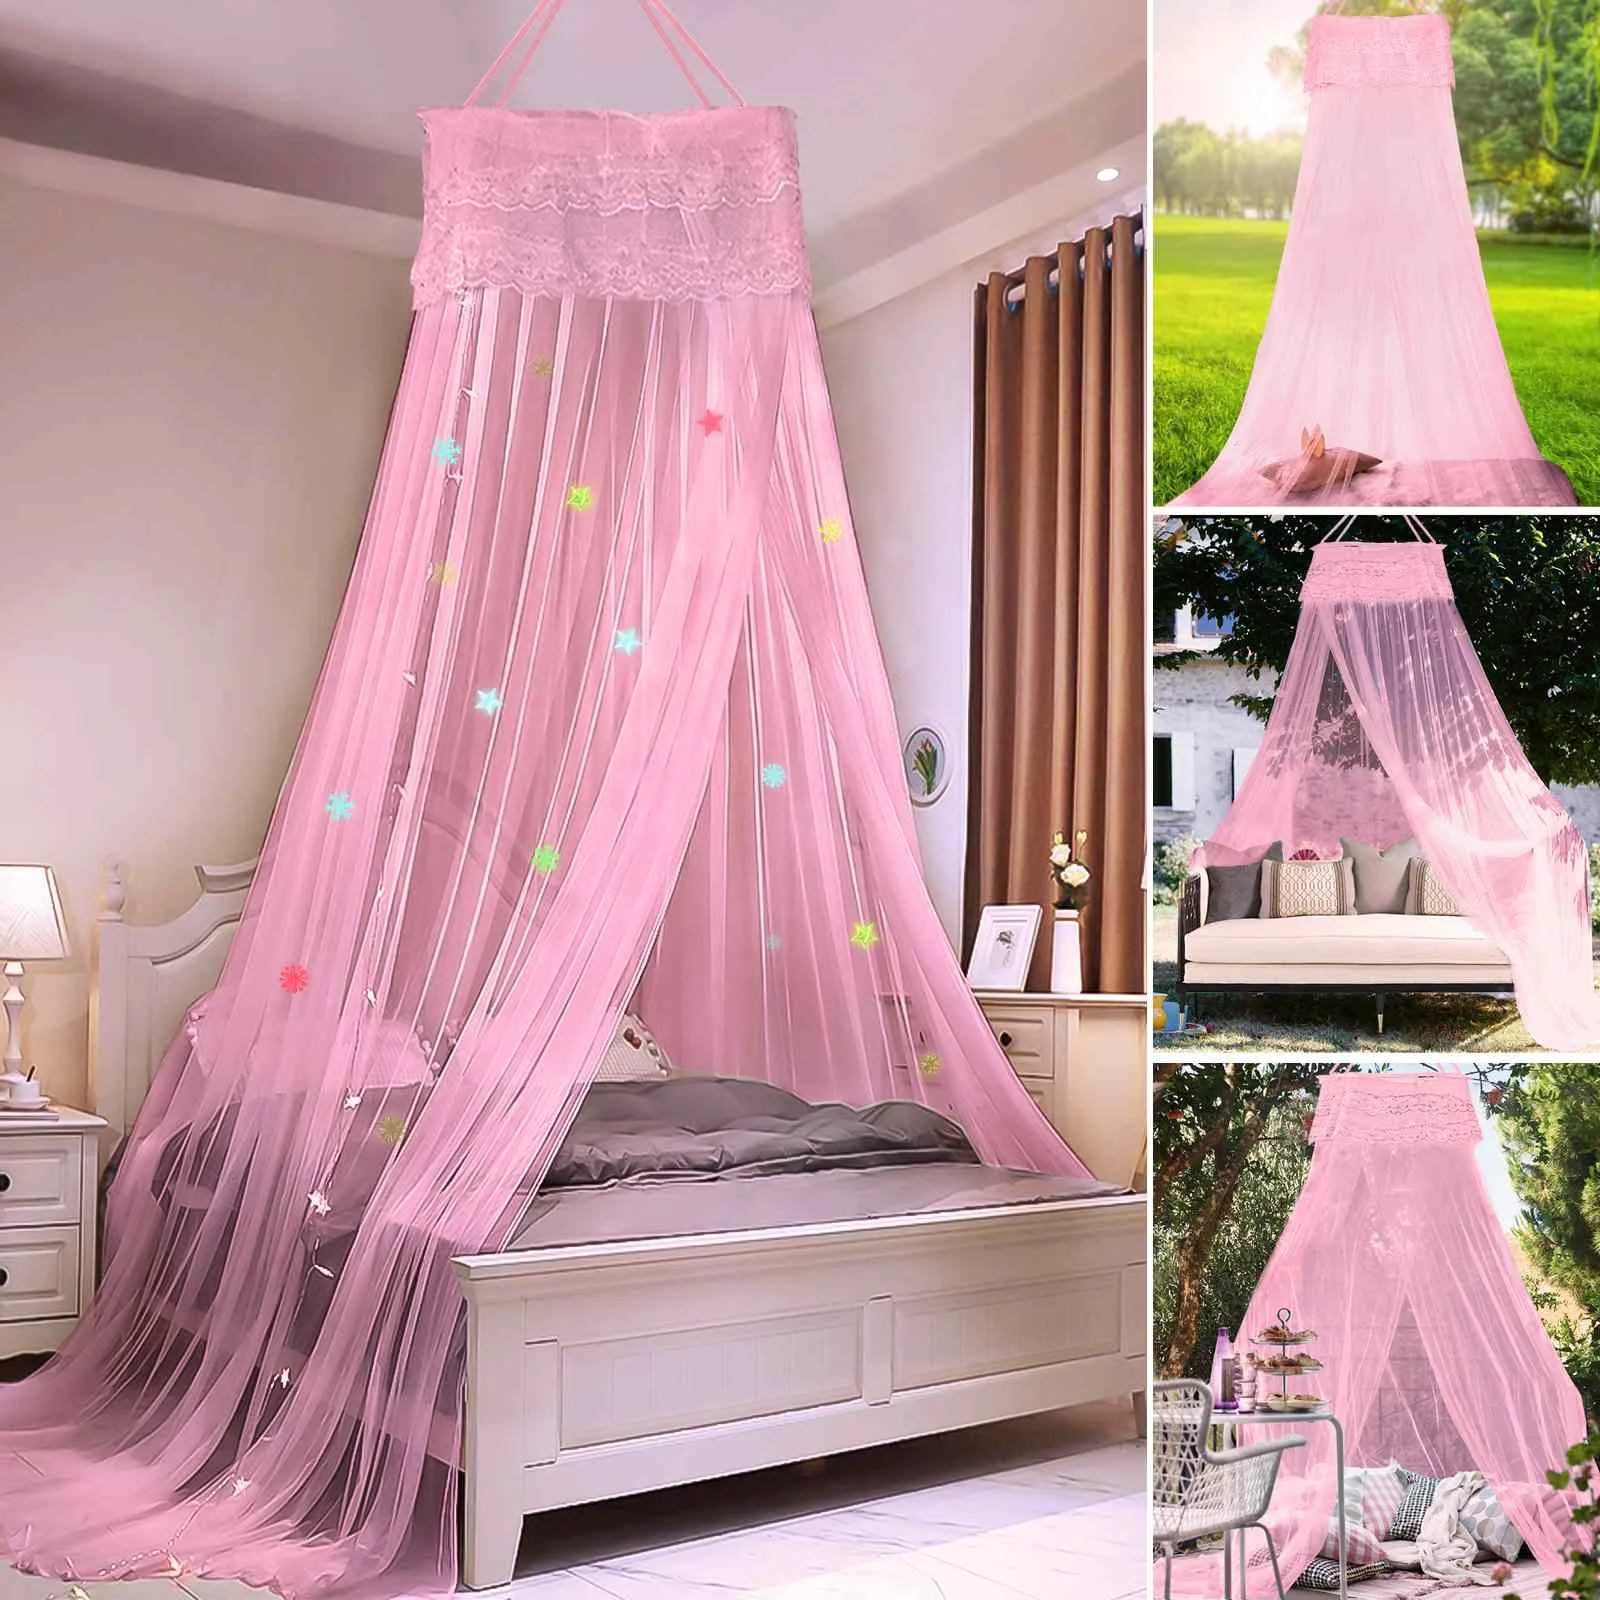 Mosquito Net Bedding Lace Elegant Princess Dome Mesh Bedroom Bed Canopy Nets US 